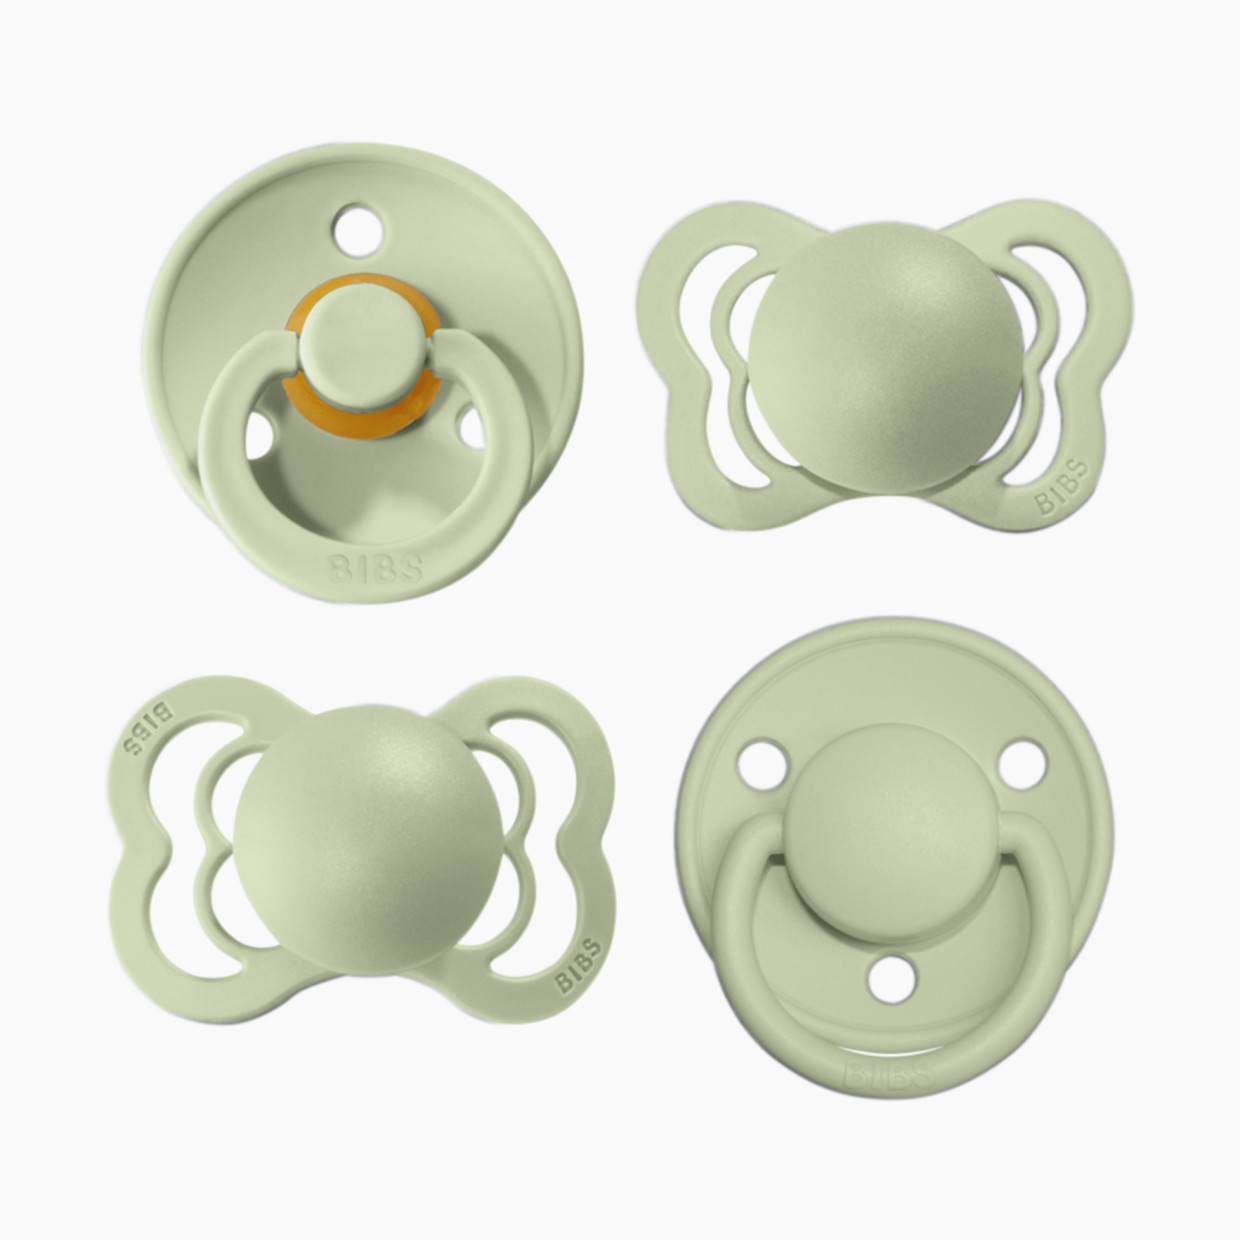 BIBS Try-it Pacifier Collection - Sage, 0-6 Months.